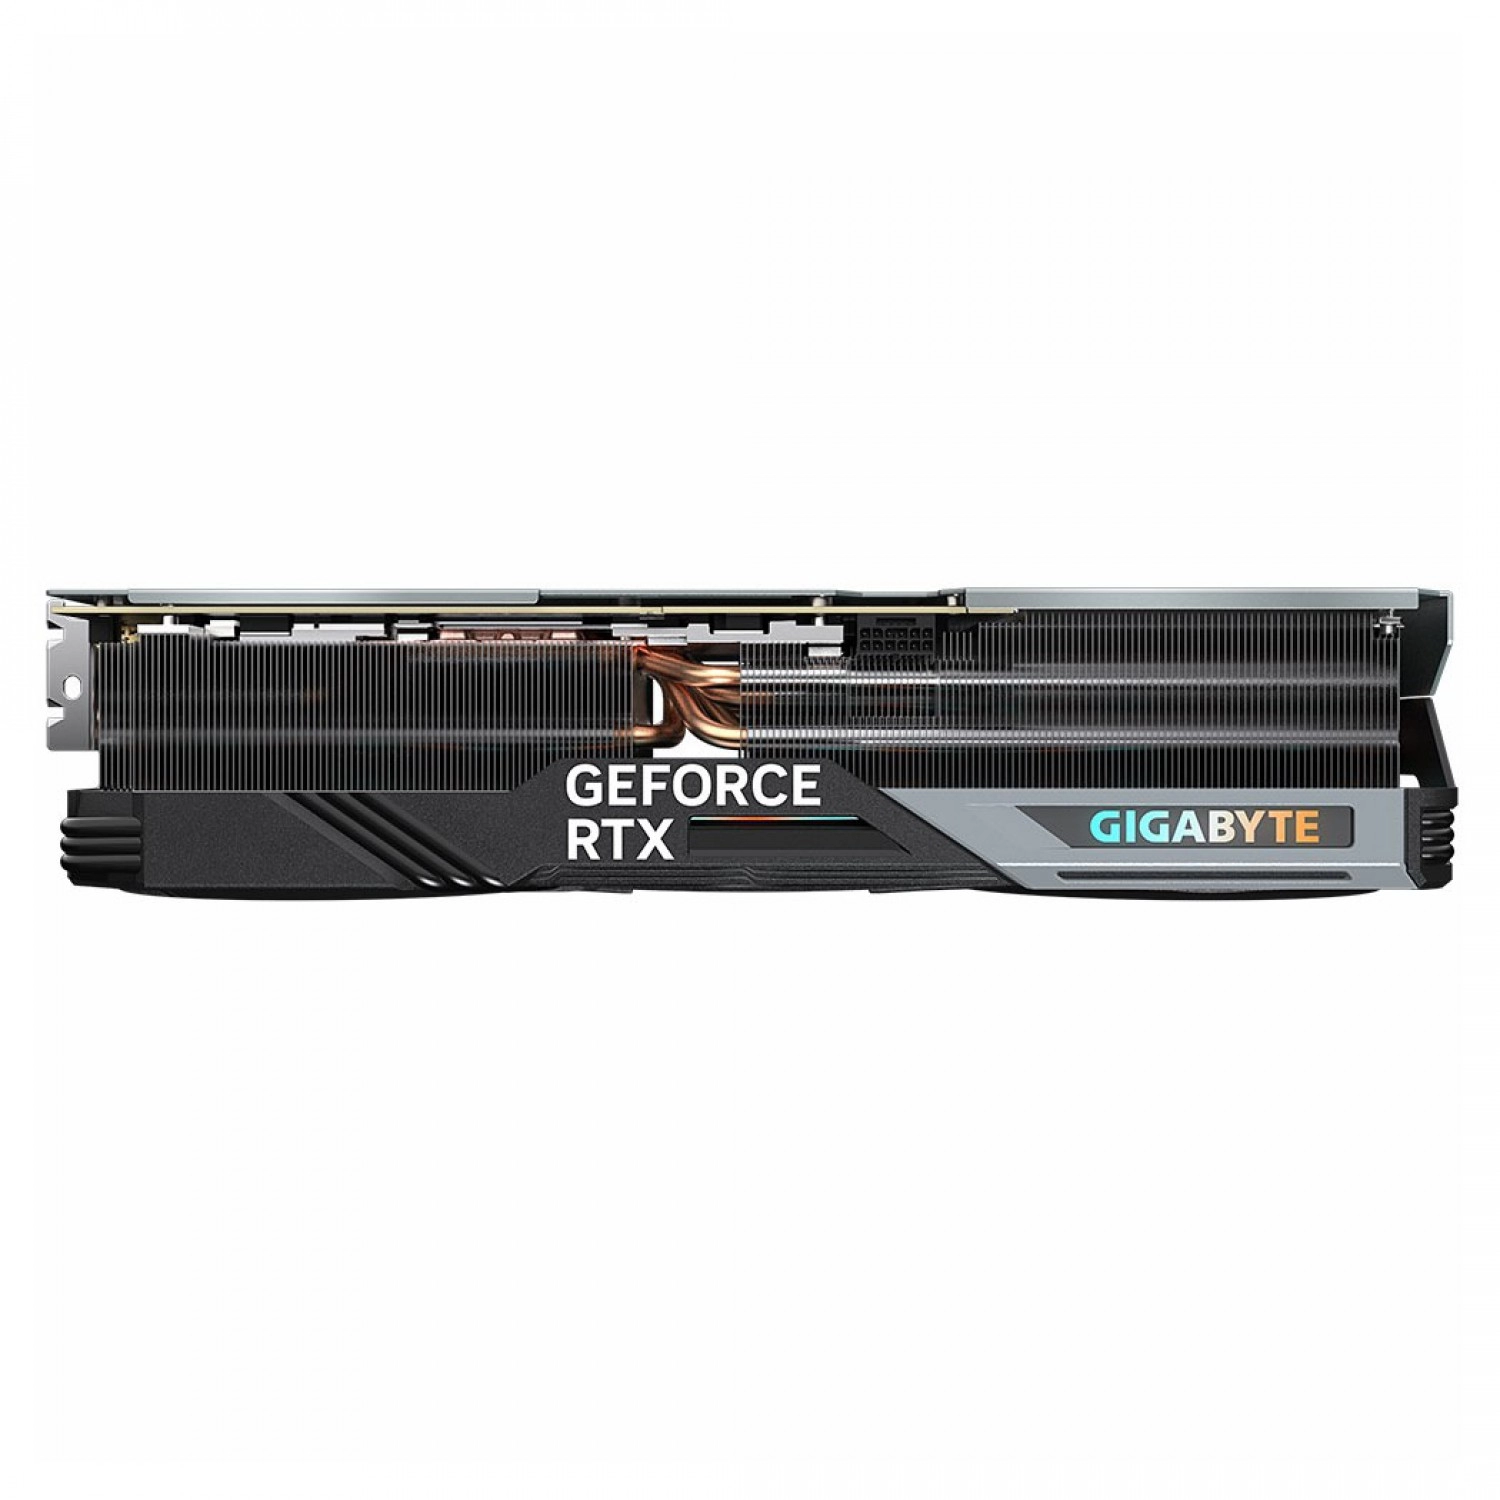 Gigabyte GeForce RTX 4090 GAMING 24G Front View